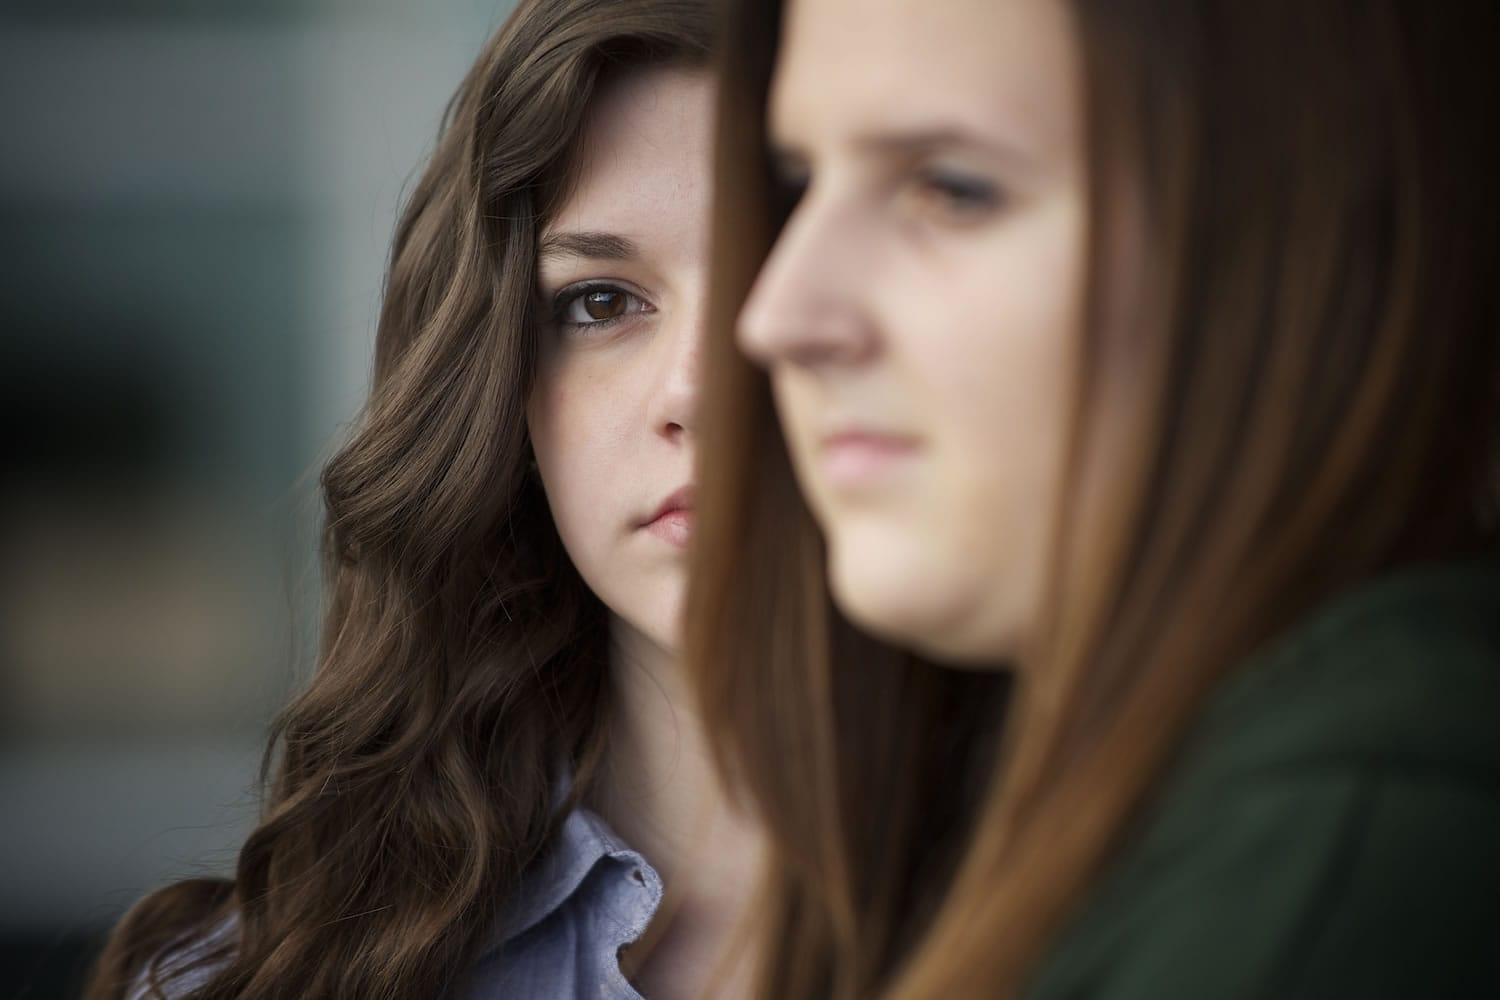 Sarah Miller, 14, and Madison Schumacher, 14, eighth-grade students at Chief Umtuch Middle School, advocate for students being proactive and seeking help if they experience bullying. After two classmates committed suicide about six weeks apart, Principal Dave Cresap sent a letter home to parents informing them about bullying on Facebook and the term &quot;frenemy.&quot; In a Columbian interview, he said, &quot;Suicide has hit us pretty hard.